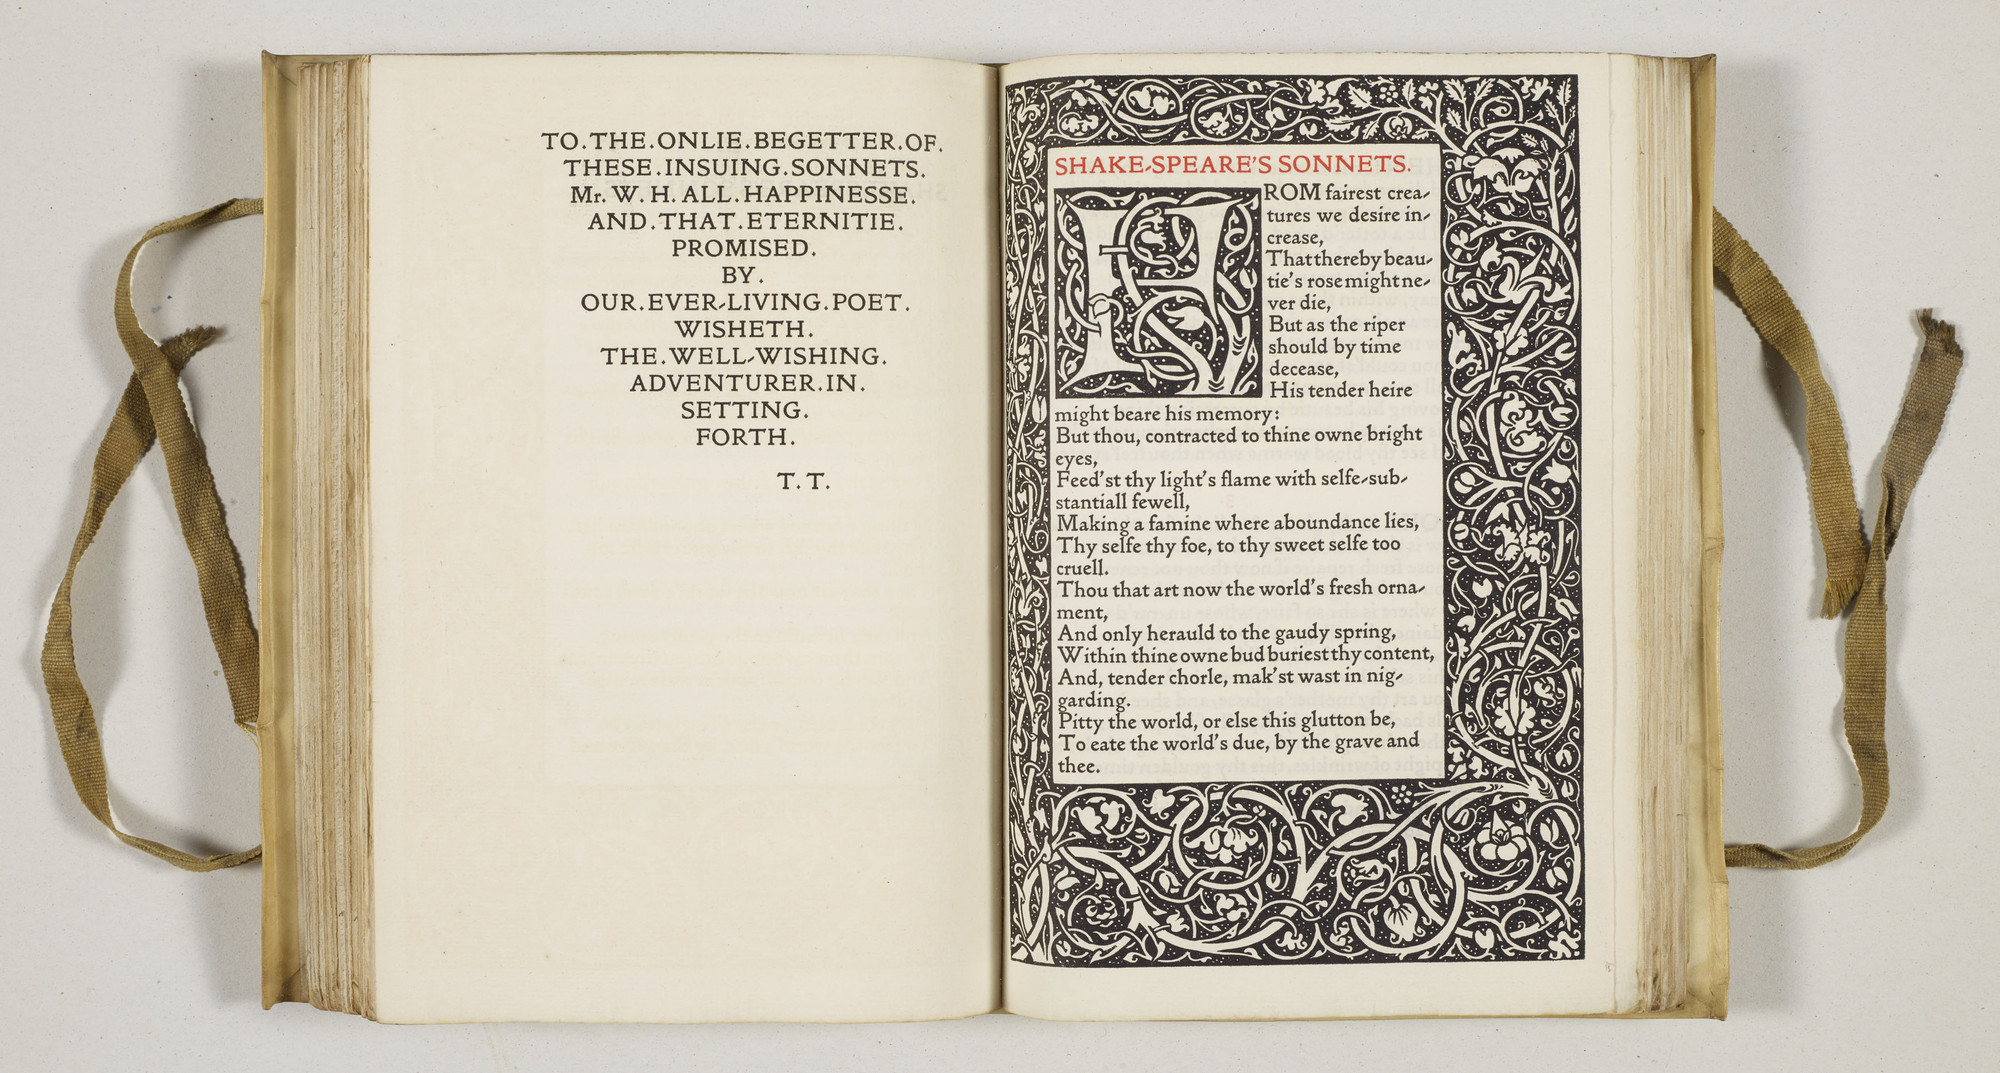 Amongst the more modern holdings of Shakespeare&rsquo;s works in the Royal Library is this Kelmscott Press edition of the poems and sonnets. The Kelmscott Press, run by the arts-and-crafts designer William Morris (1834&ndash;96), aimed to produce printed 